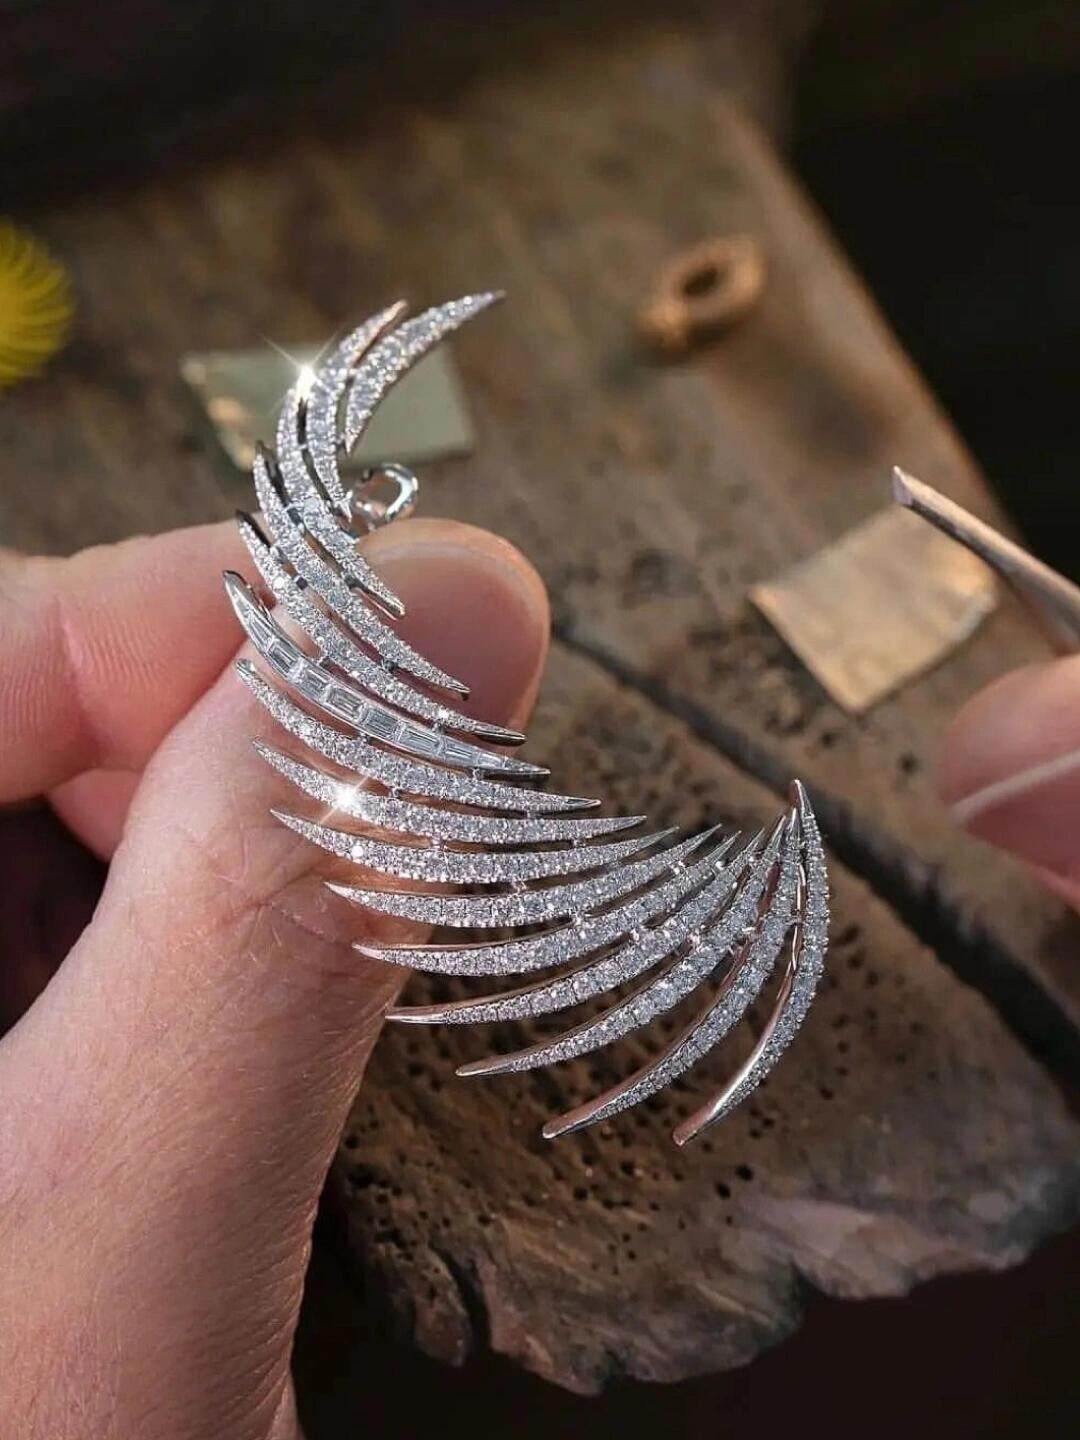 The Artistry of Jewelry Making: A Glimpse into the Craftsmanship